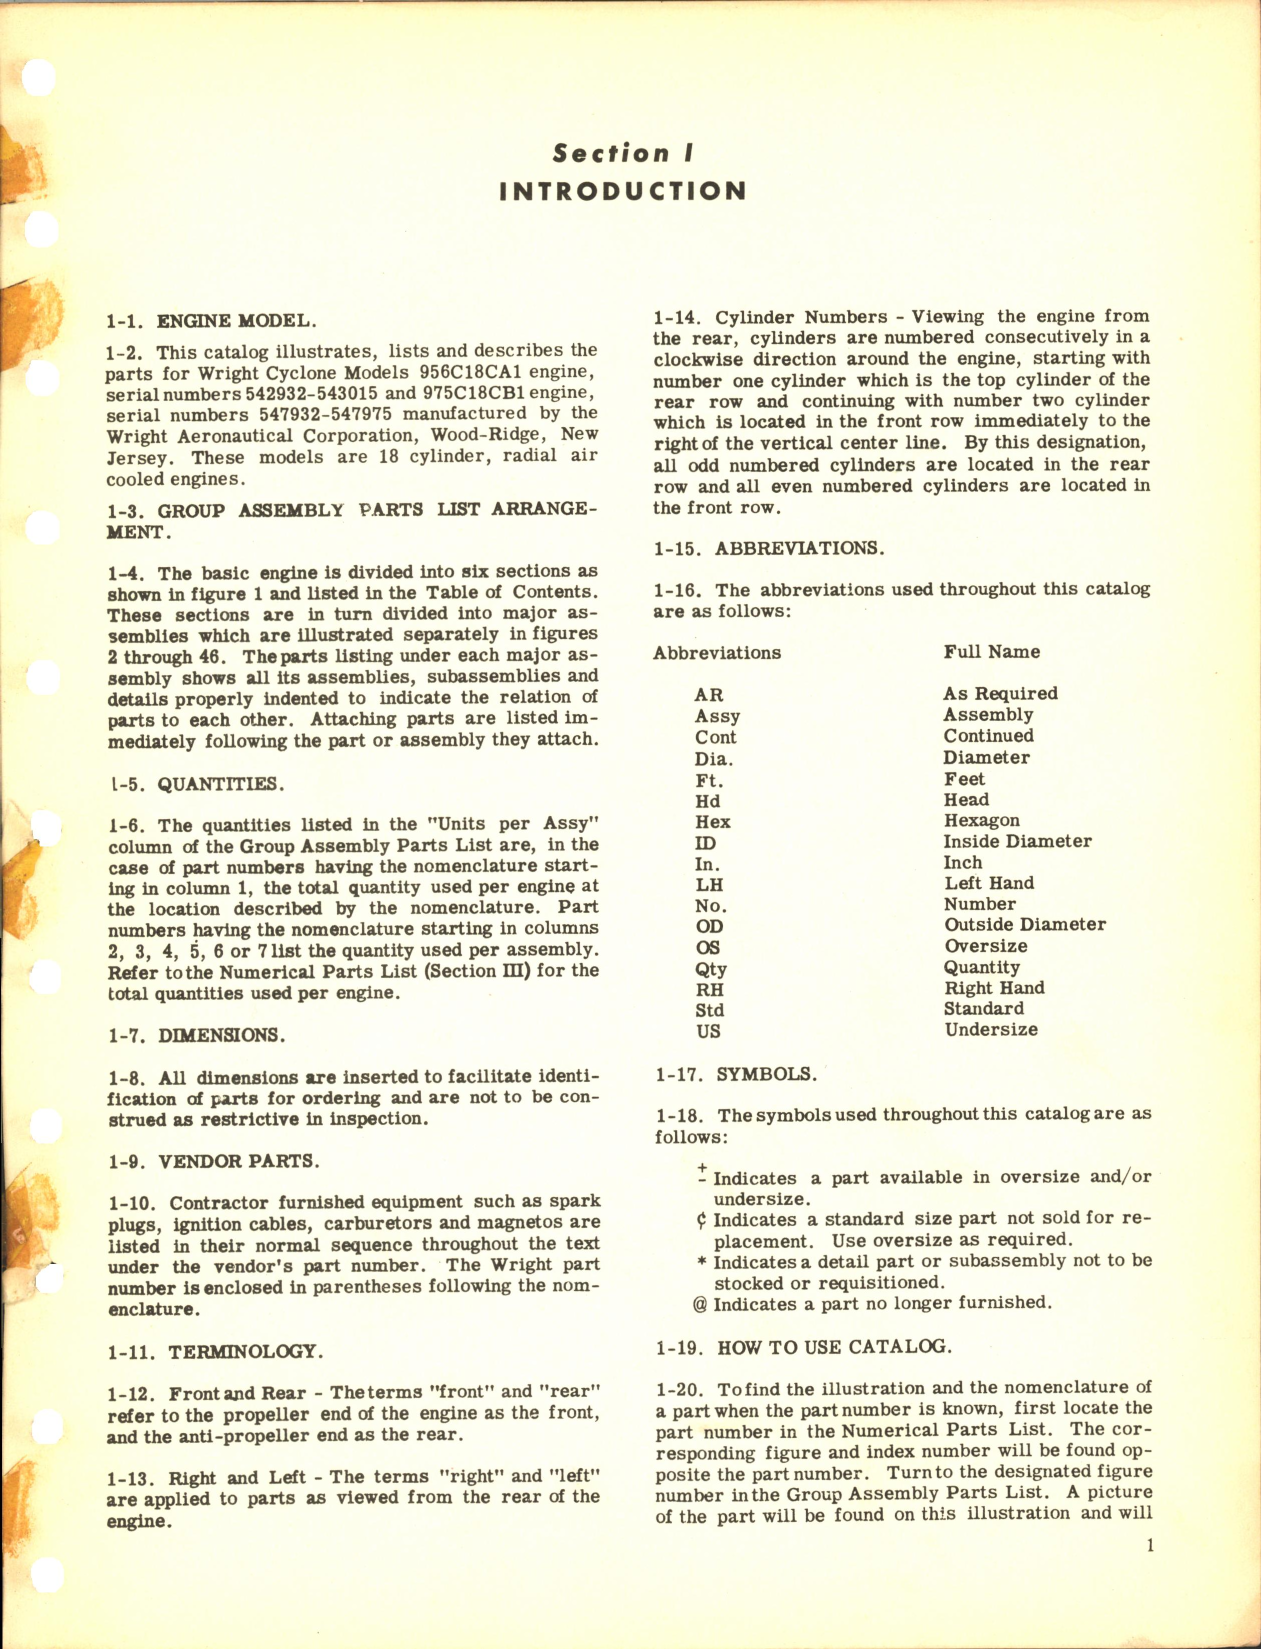 Sample page 5 from AirCorps Library document: Wright Aircraft Engines; Models 956C18CA1 and 975C18CB1 Parts Catalog